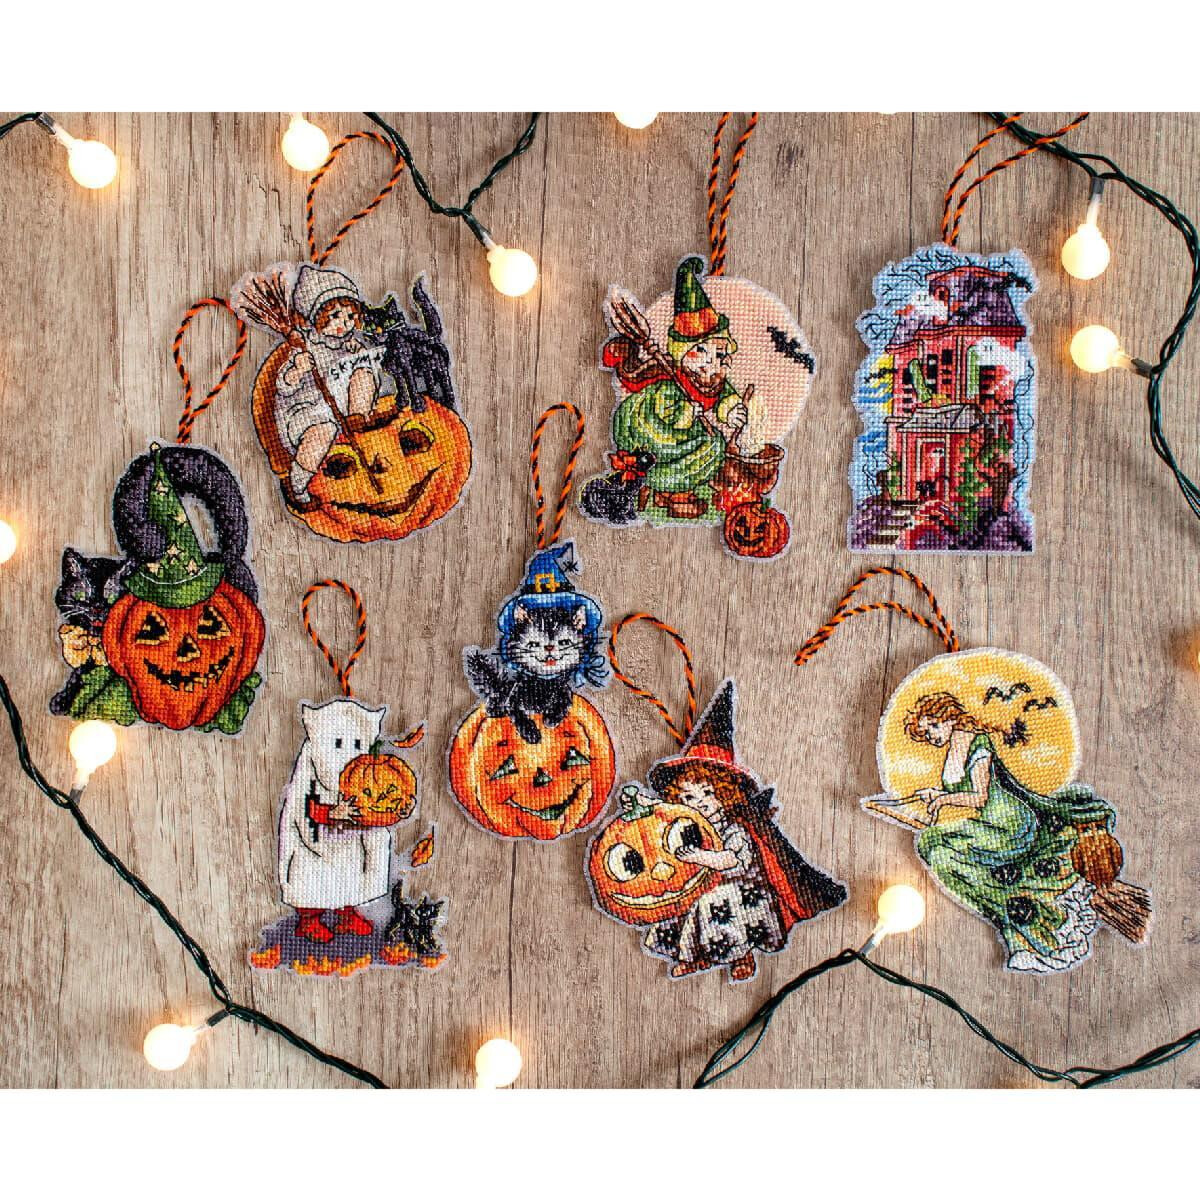 Letistitch counted cross stitch kit "Halloween toys...